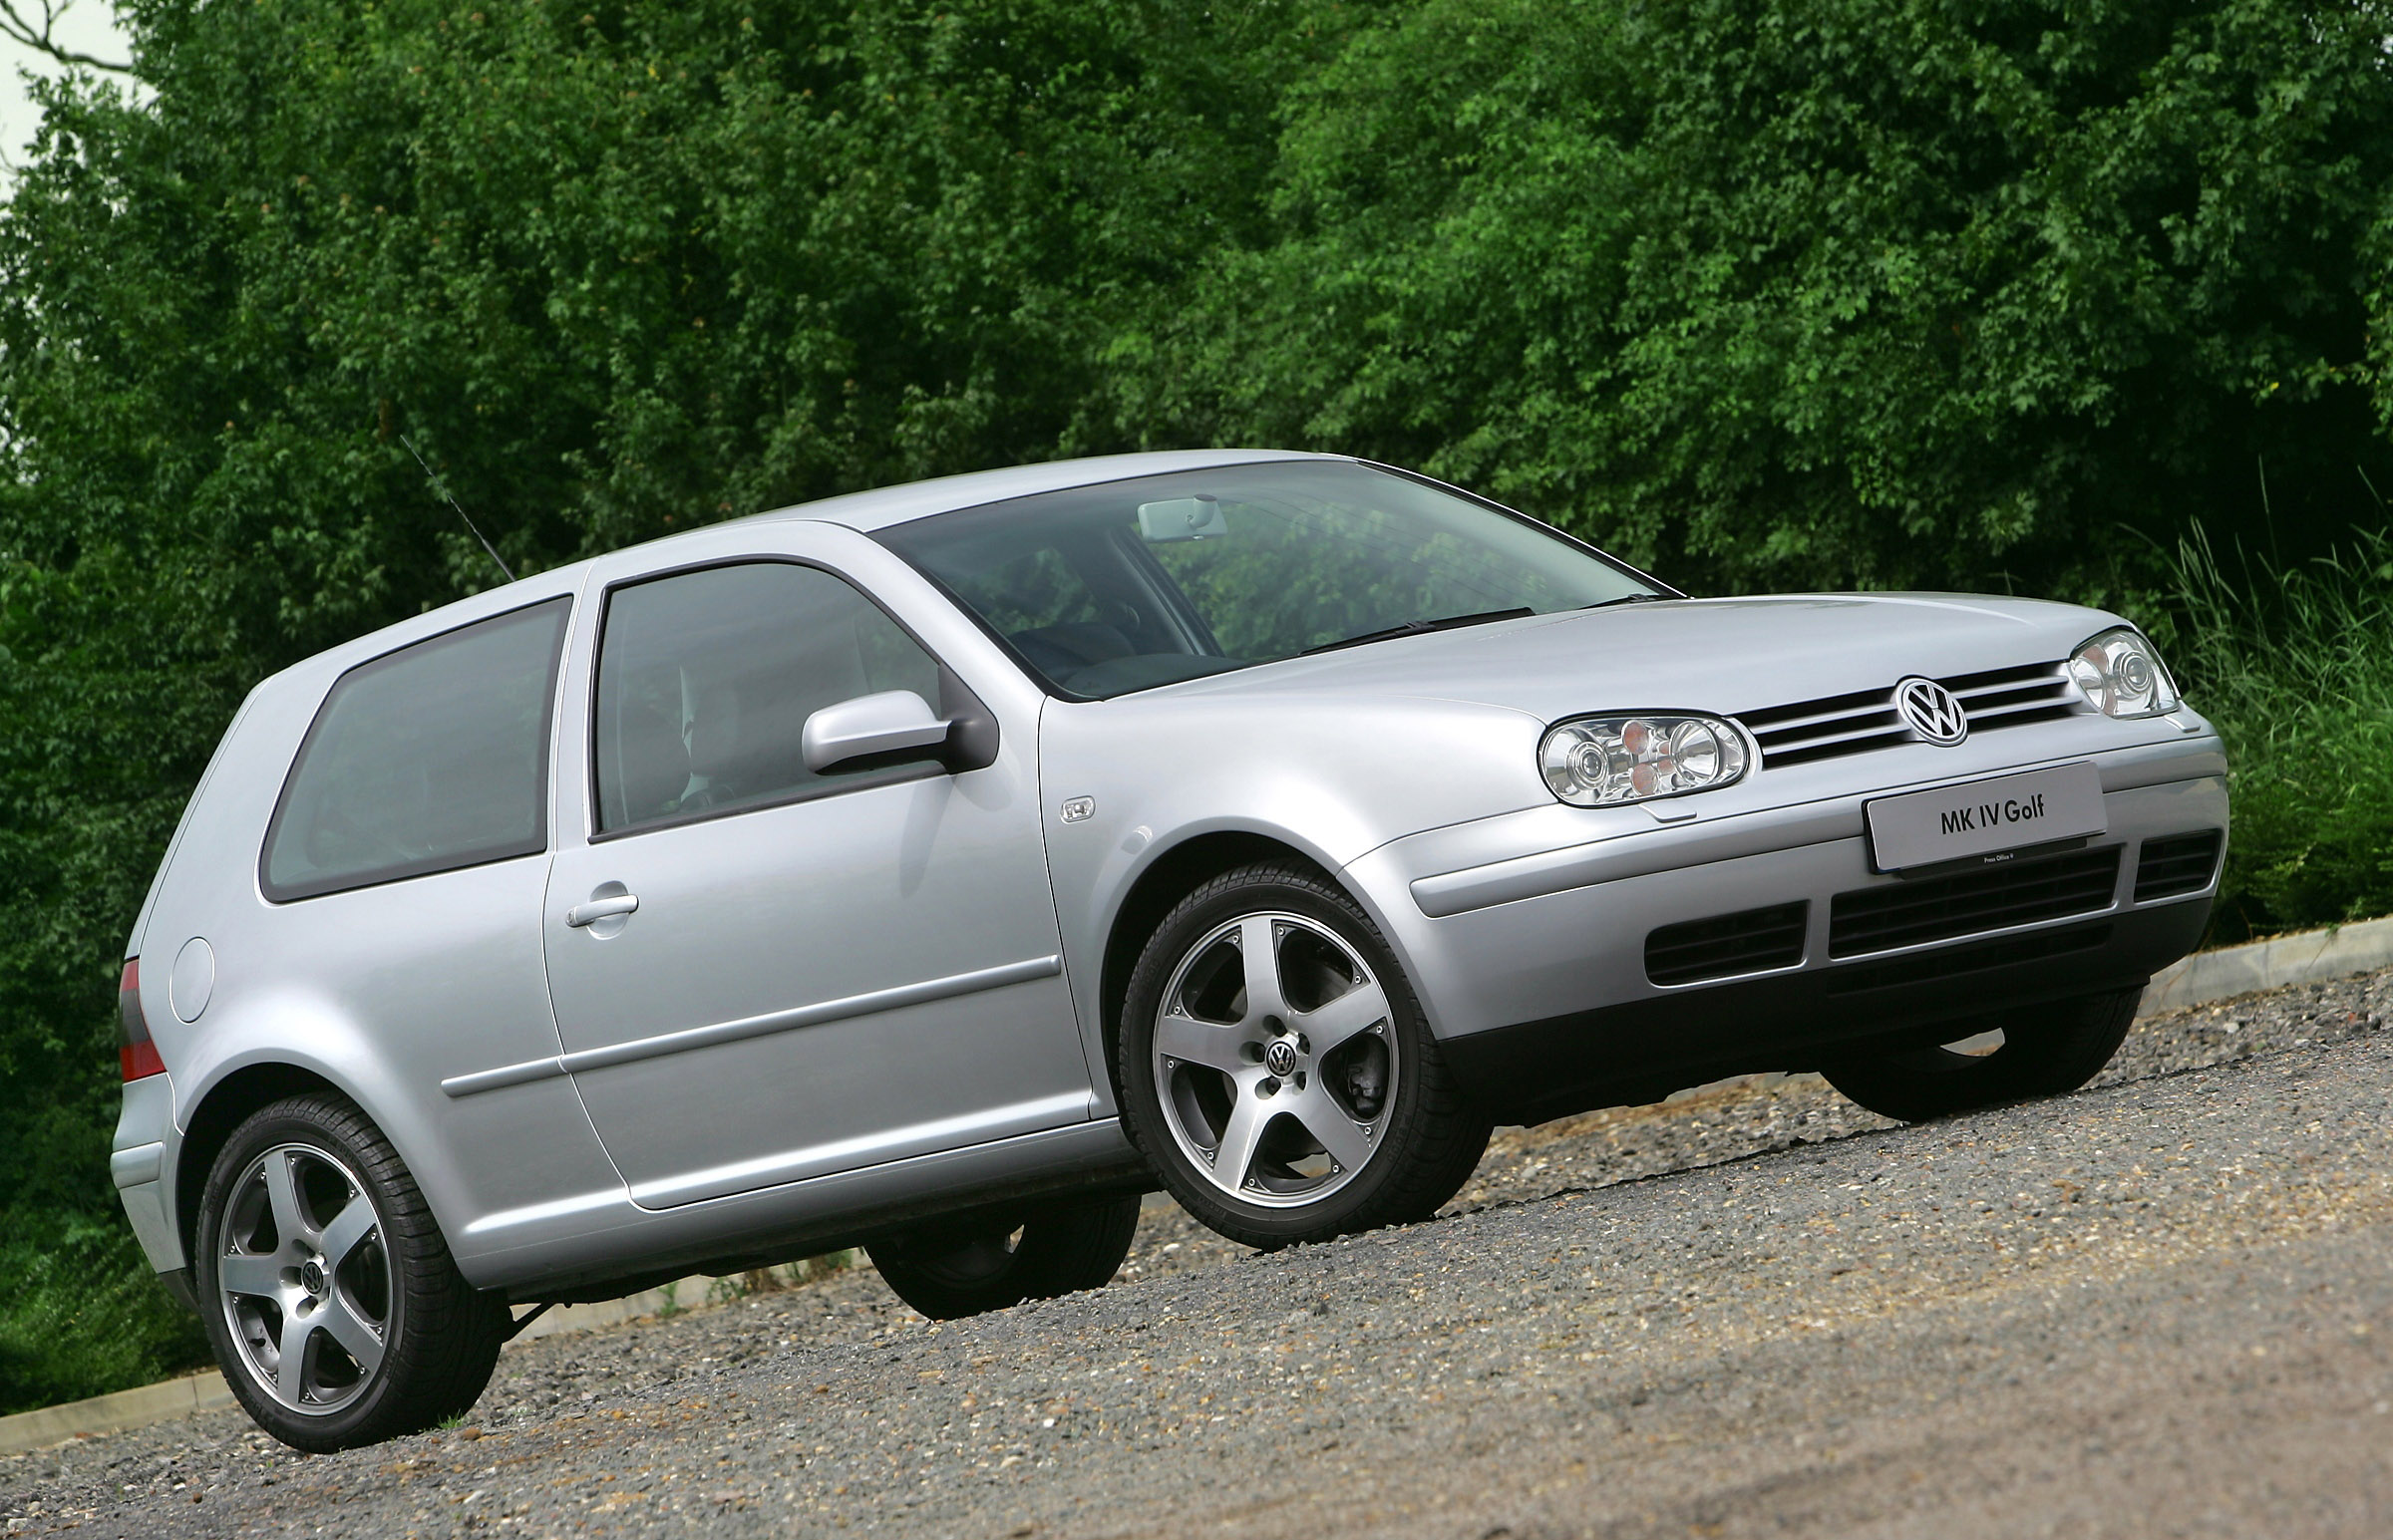 History of the Golf GTI